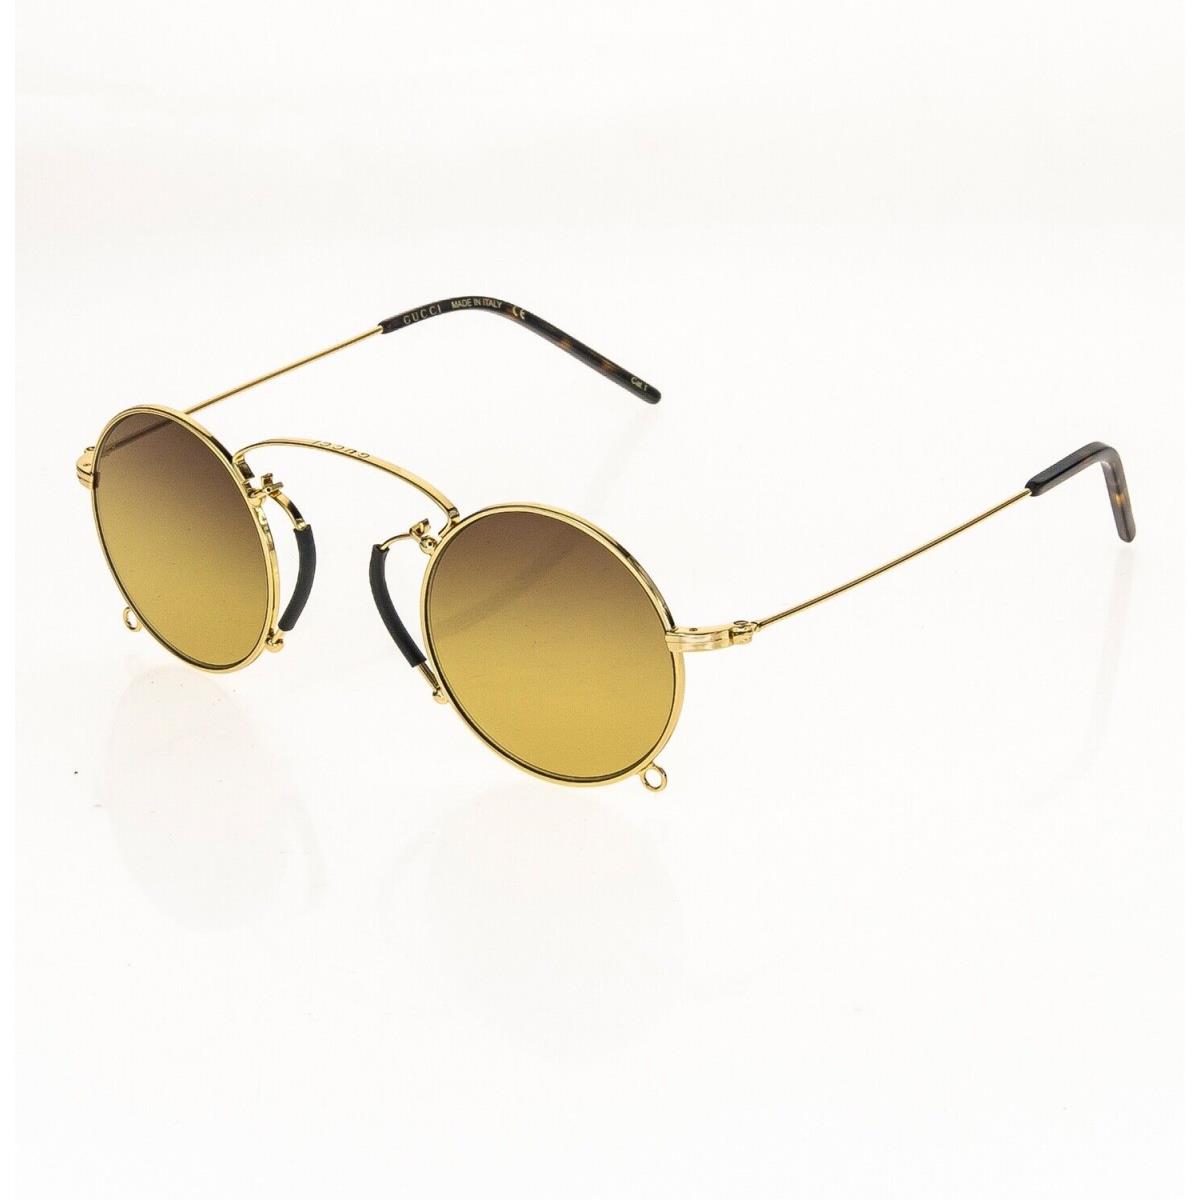 Gucci sunglasses  - 003 , Gold Frame, Brown Lens 3